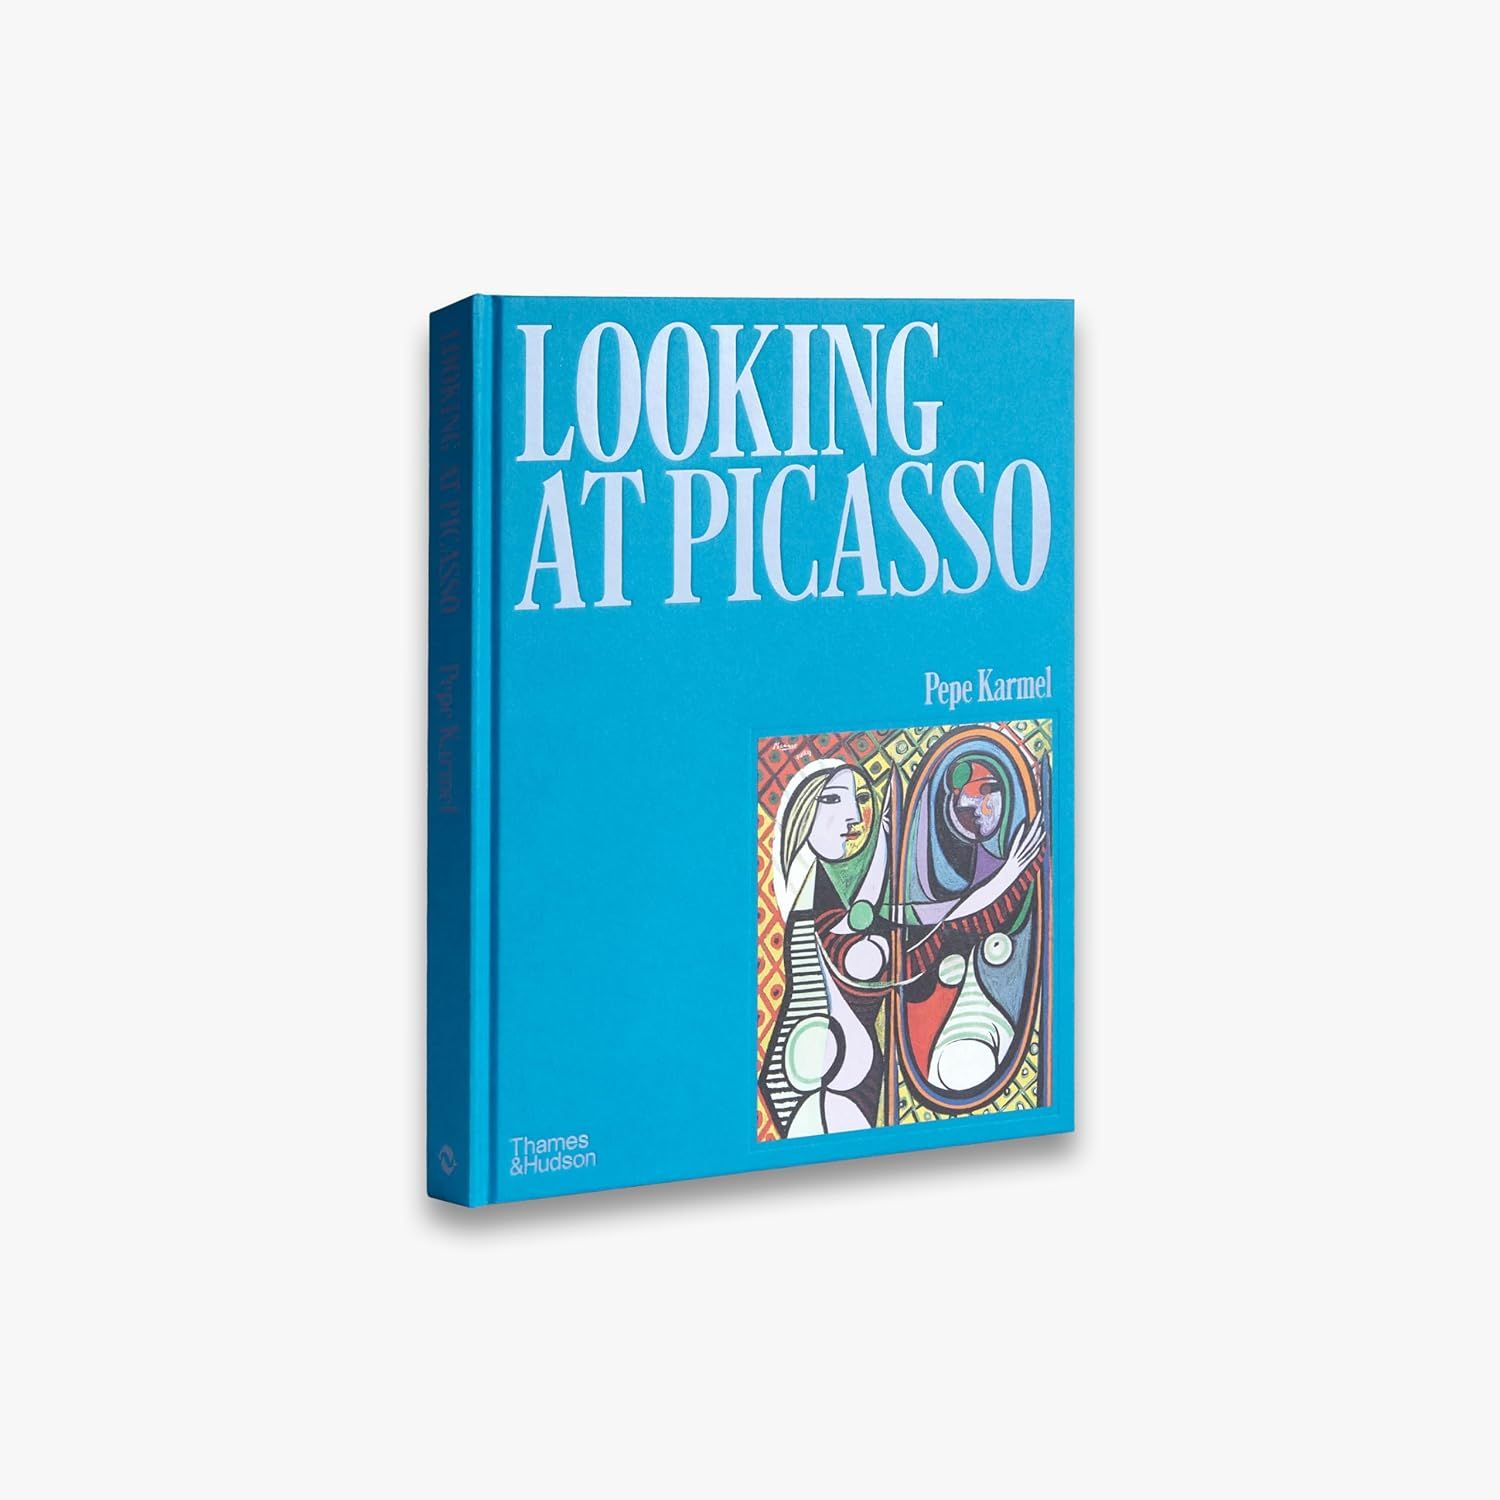  Looking at Picasso 